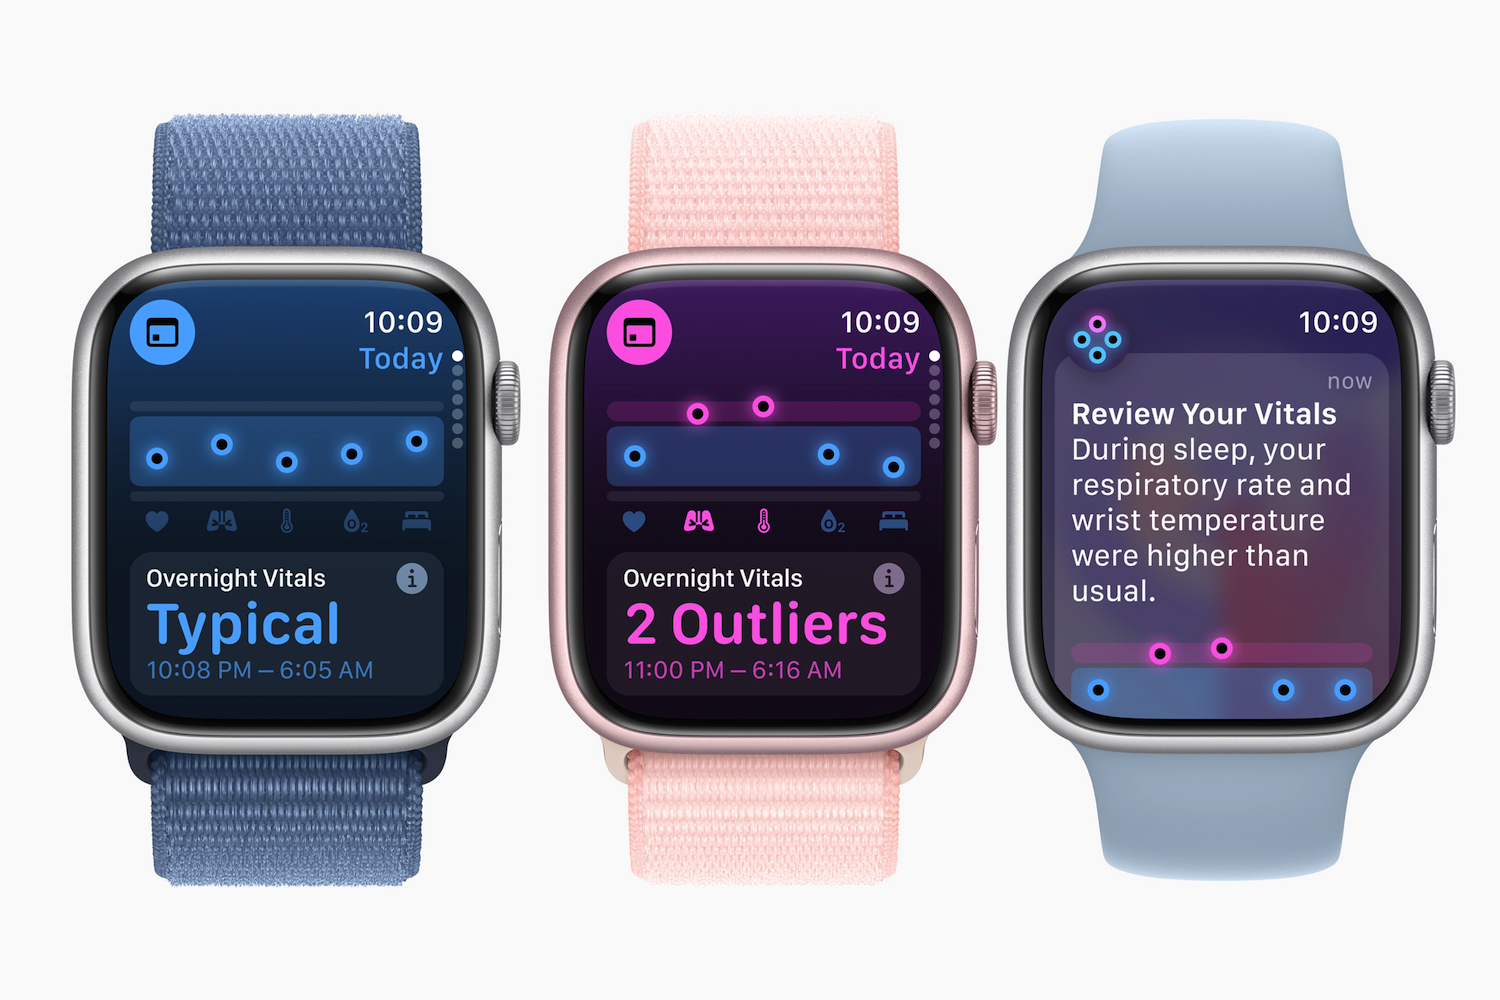 Screenshots from the Apple Vitals app on the Apple Watch.